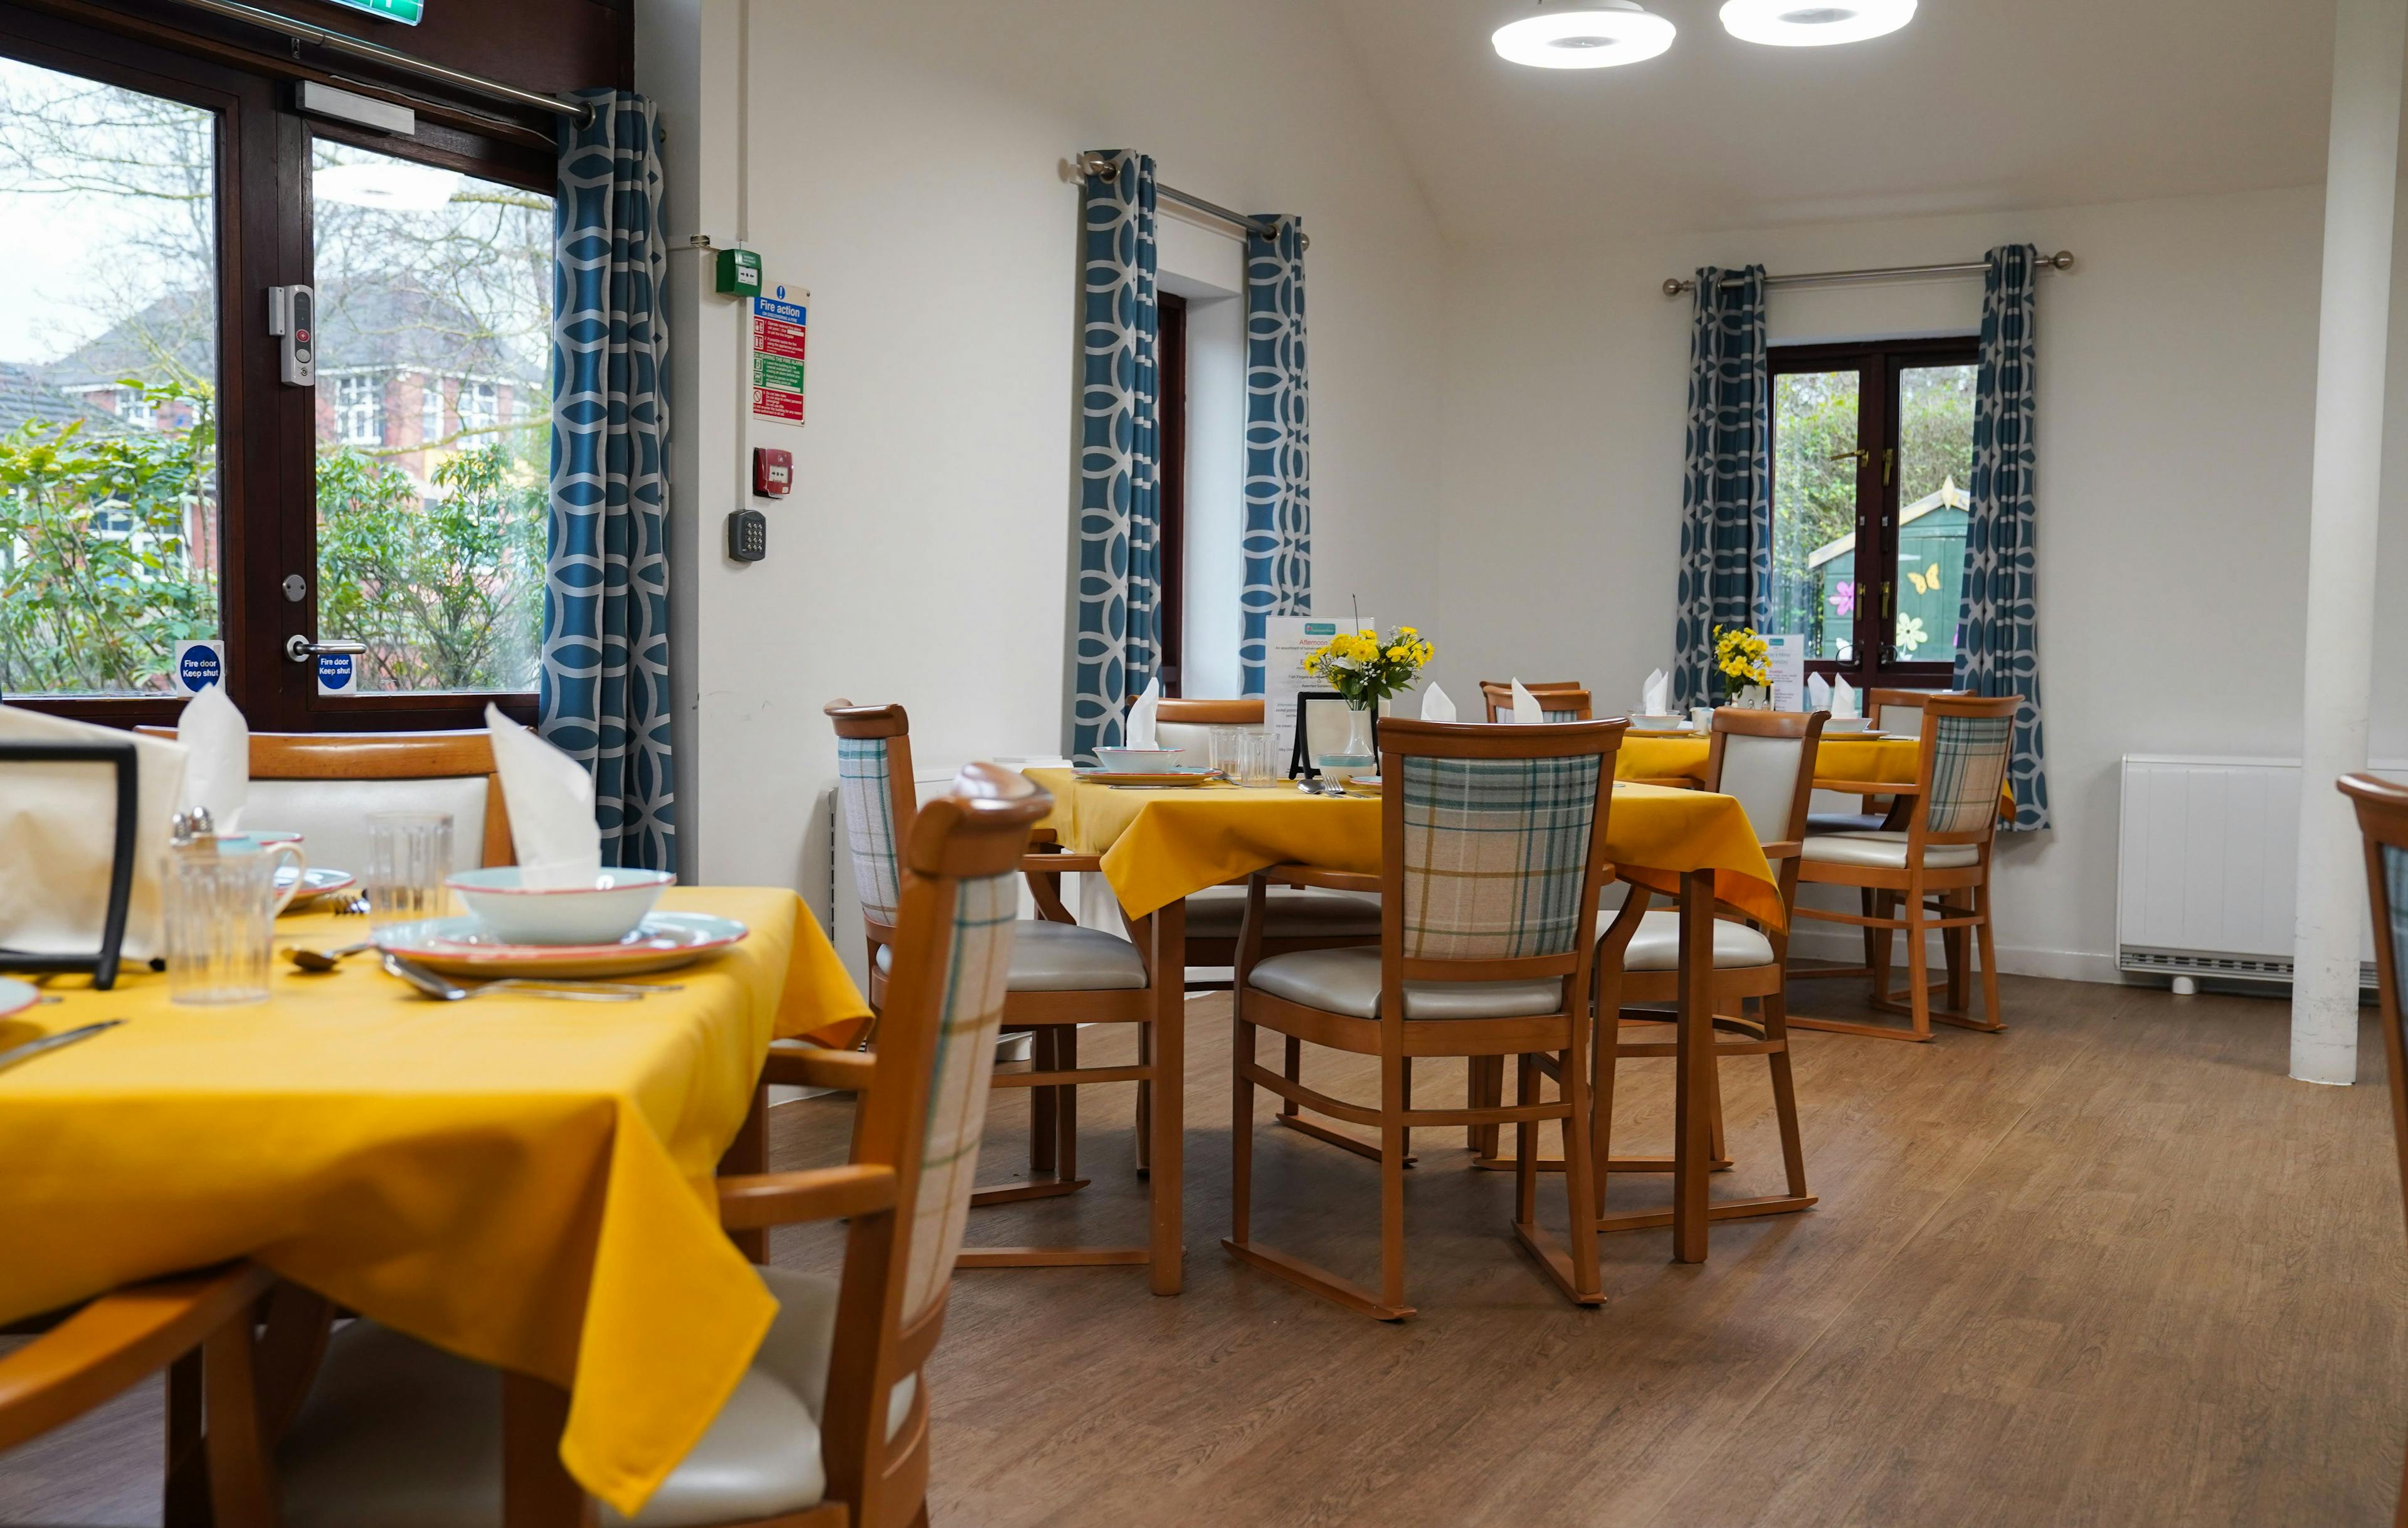 Dining Room at Broadmeadow Court Care Home in Newcastle-under-Lyme, Staffordshire